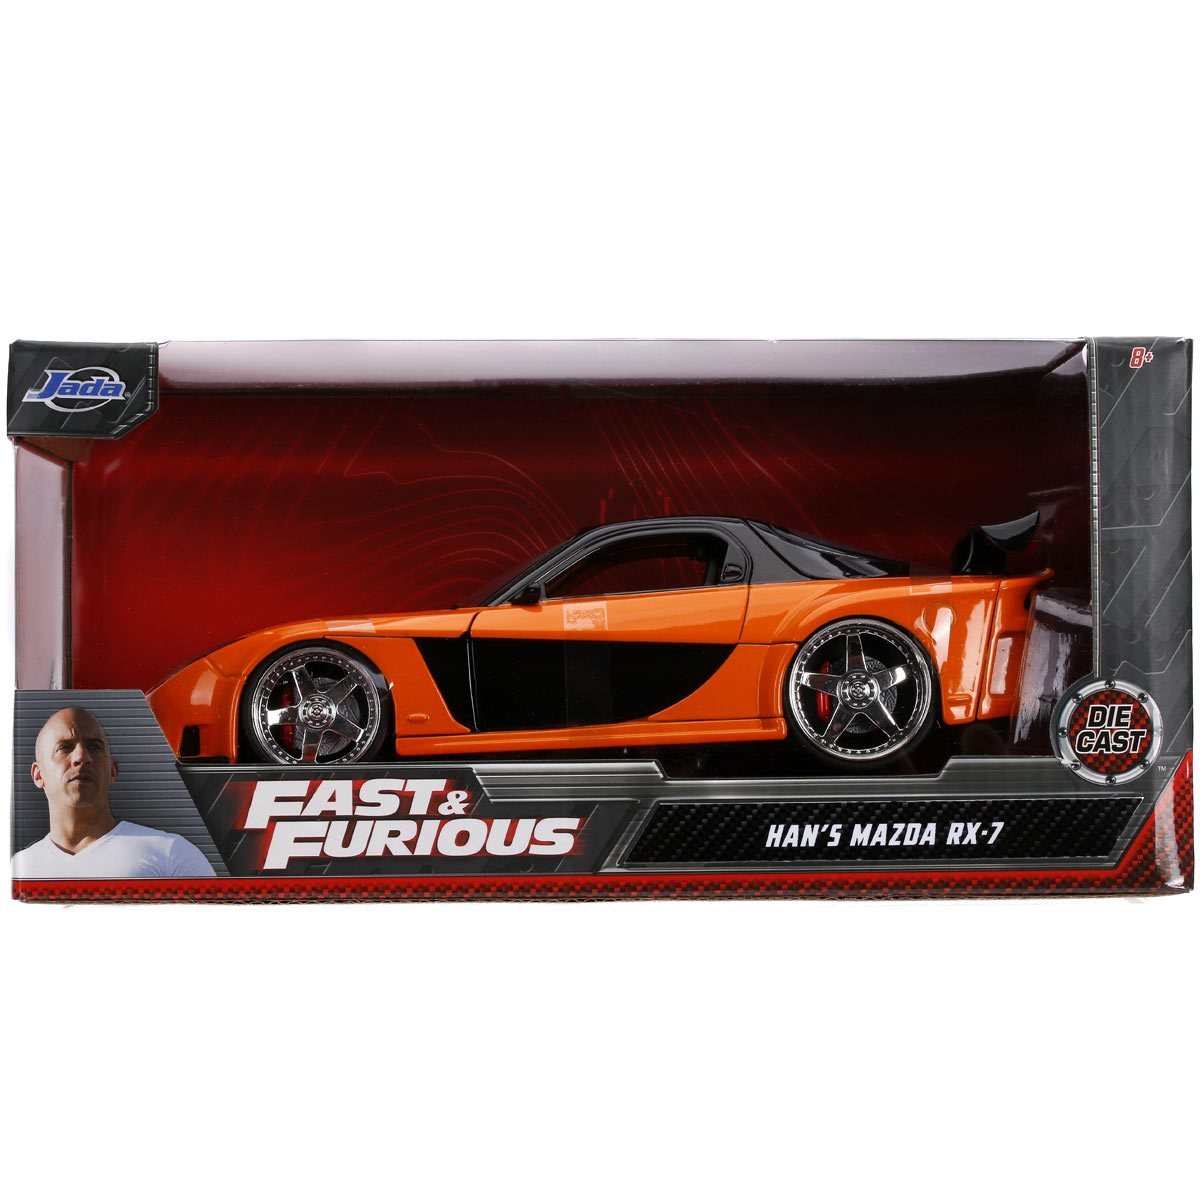 Figurine Pop Fast and Furious #920 pas cher : Shaw